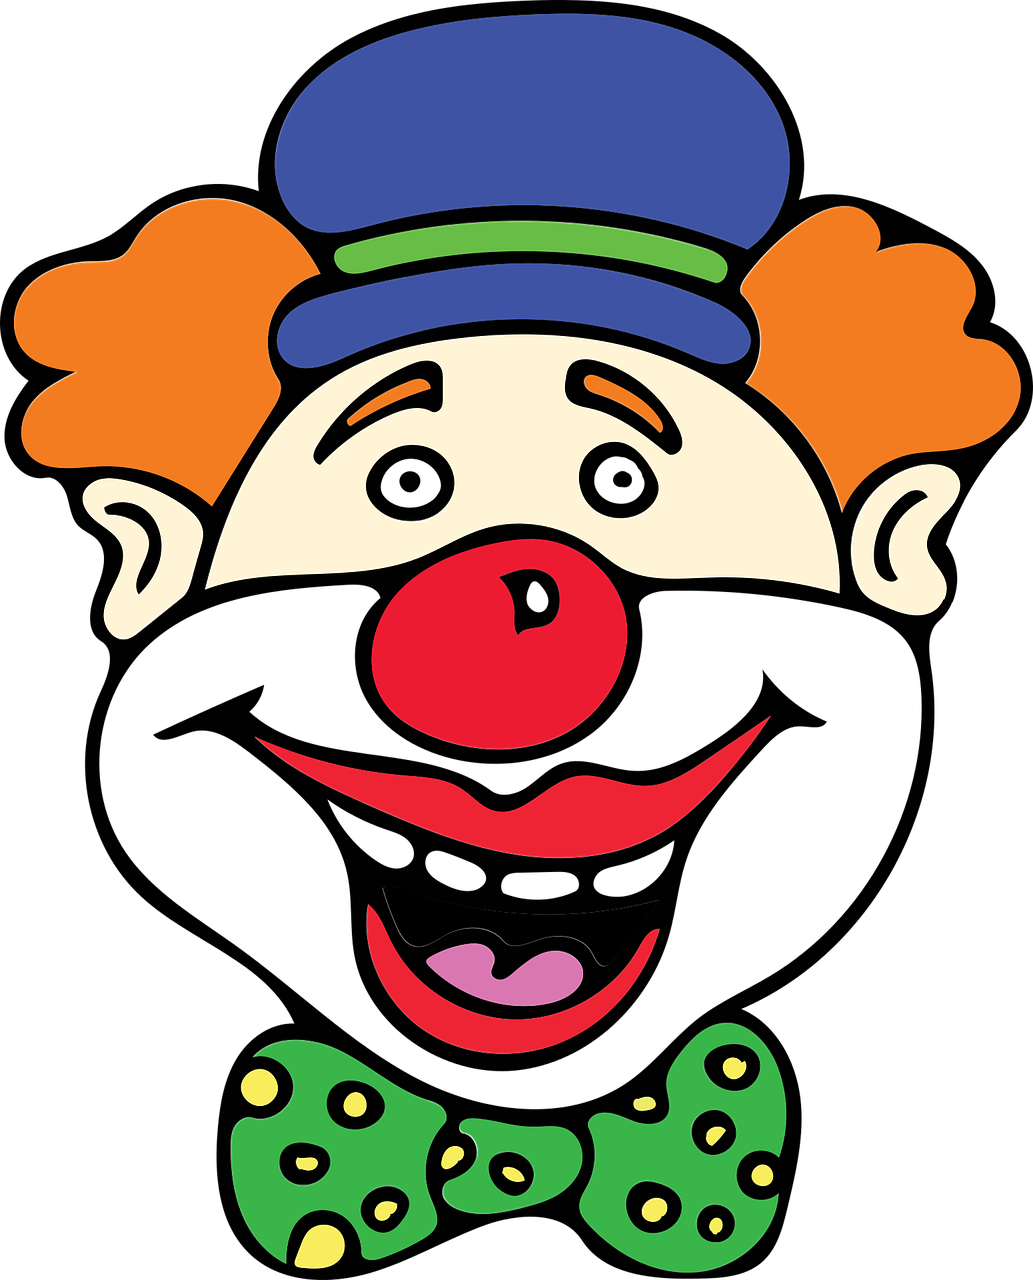 clown red nose costume free photo